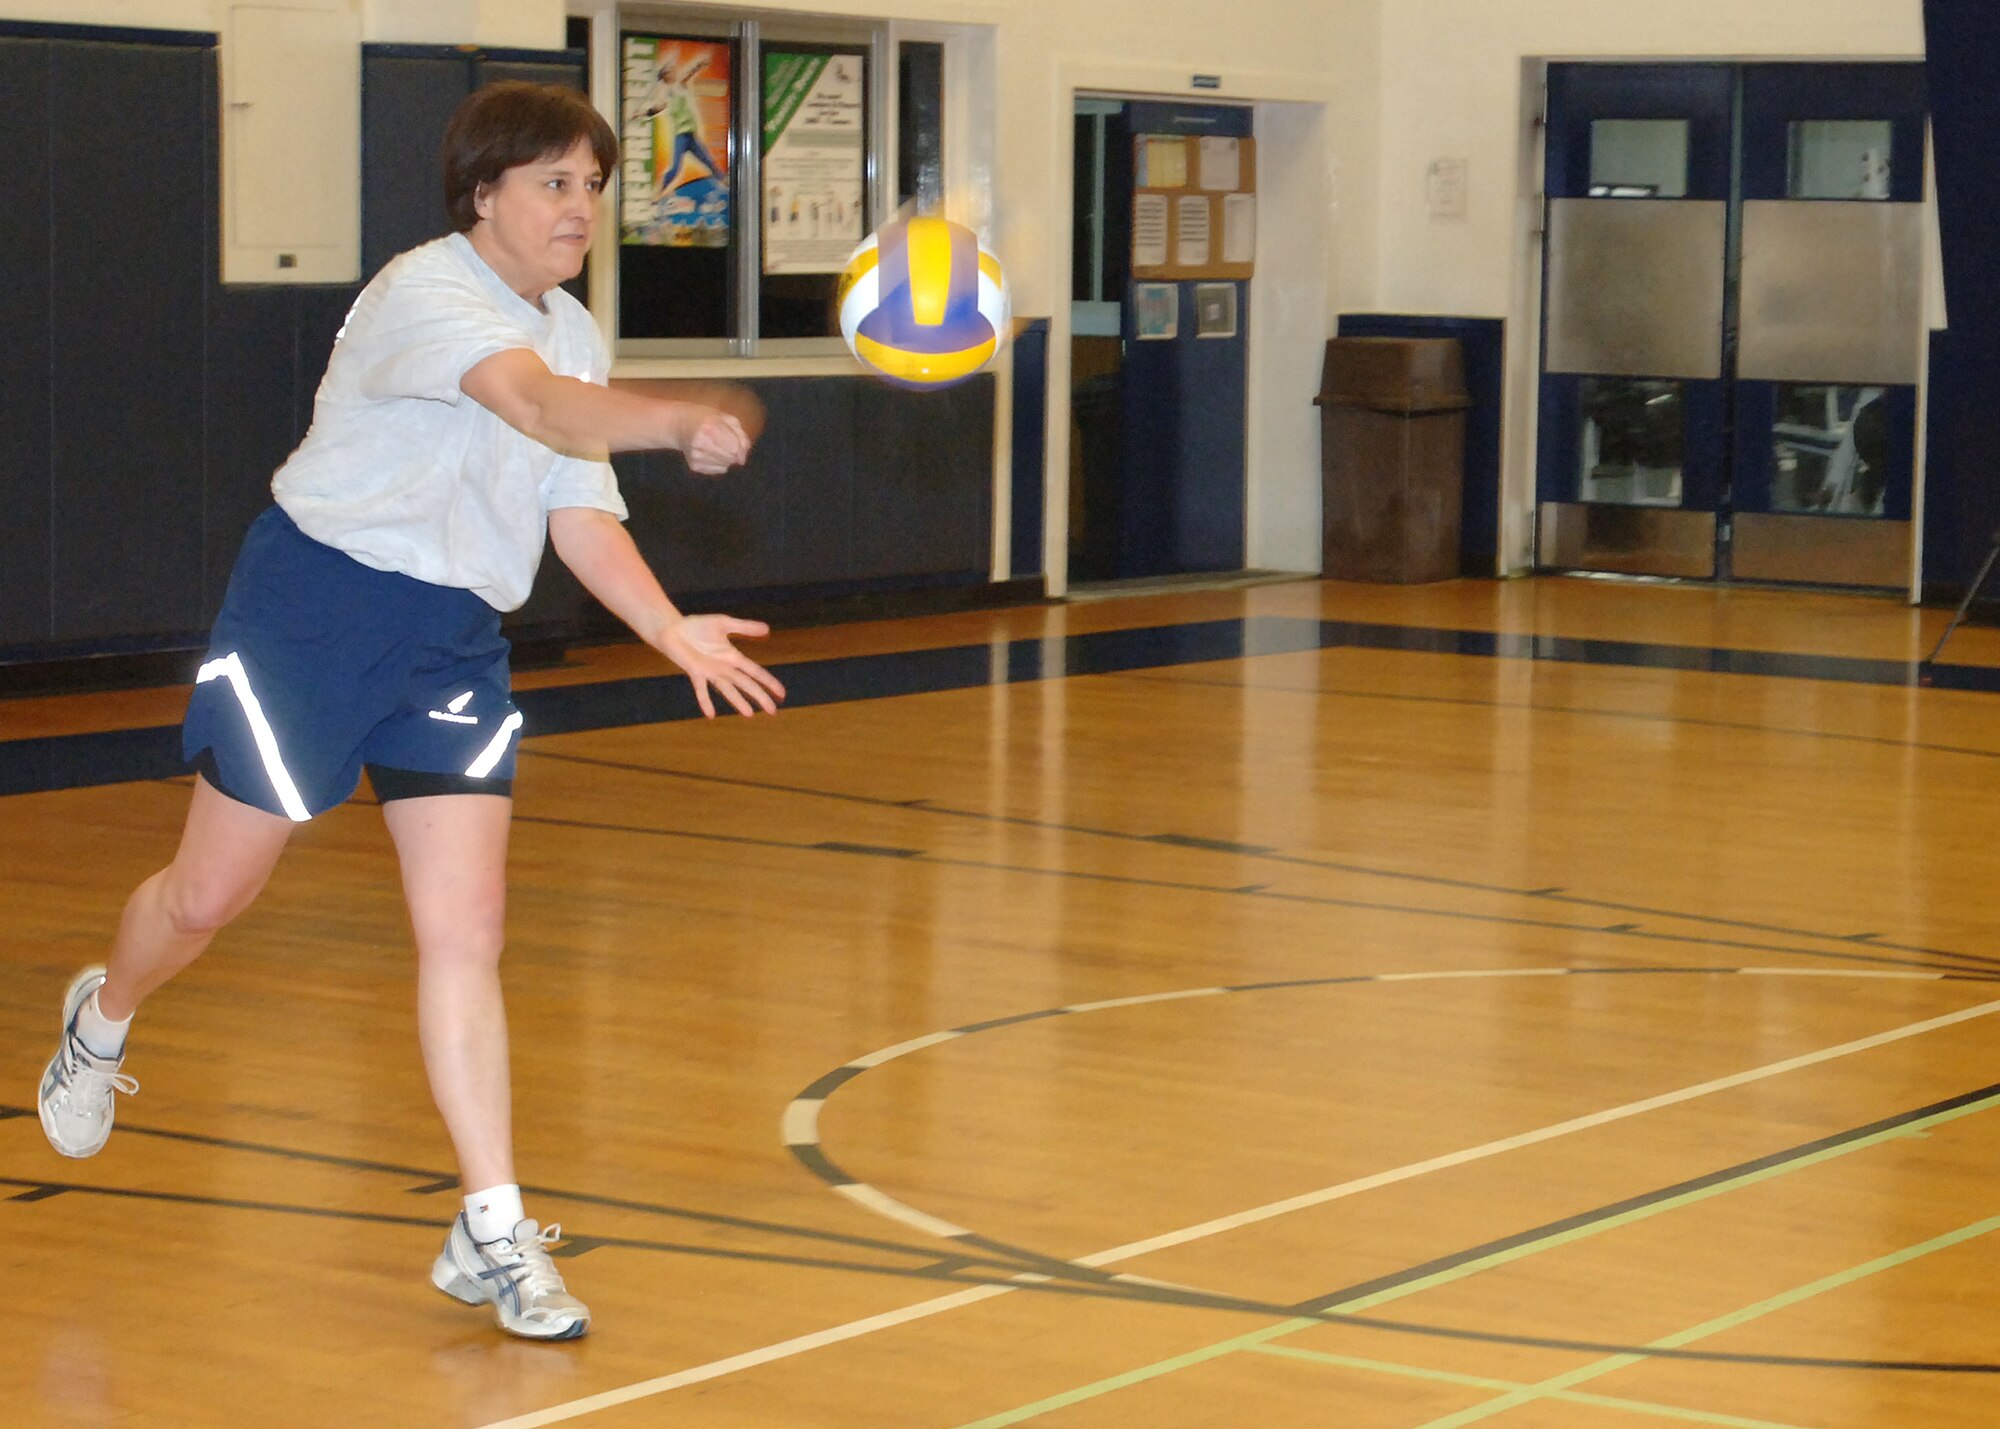 MISAWA AIR BASE, Japan -- Col. Mary Armour, 35th Medical Group commander, serves the ball during the Eagles vs. Chiefs volleyball game at the Potter Fitness Center, March 14, 2008.  The best-out-of-five series of games was tied until the end when the Chiefs earned their victory.  (U.S. Air Force photo by Senior Airman Robert Barnett)